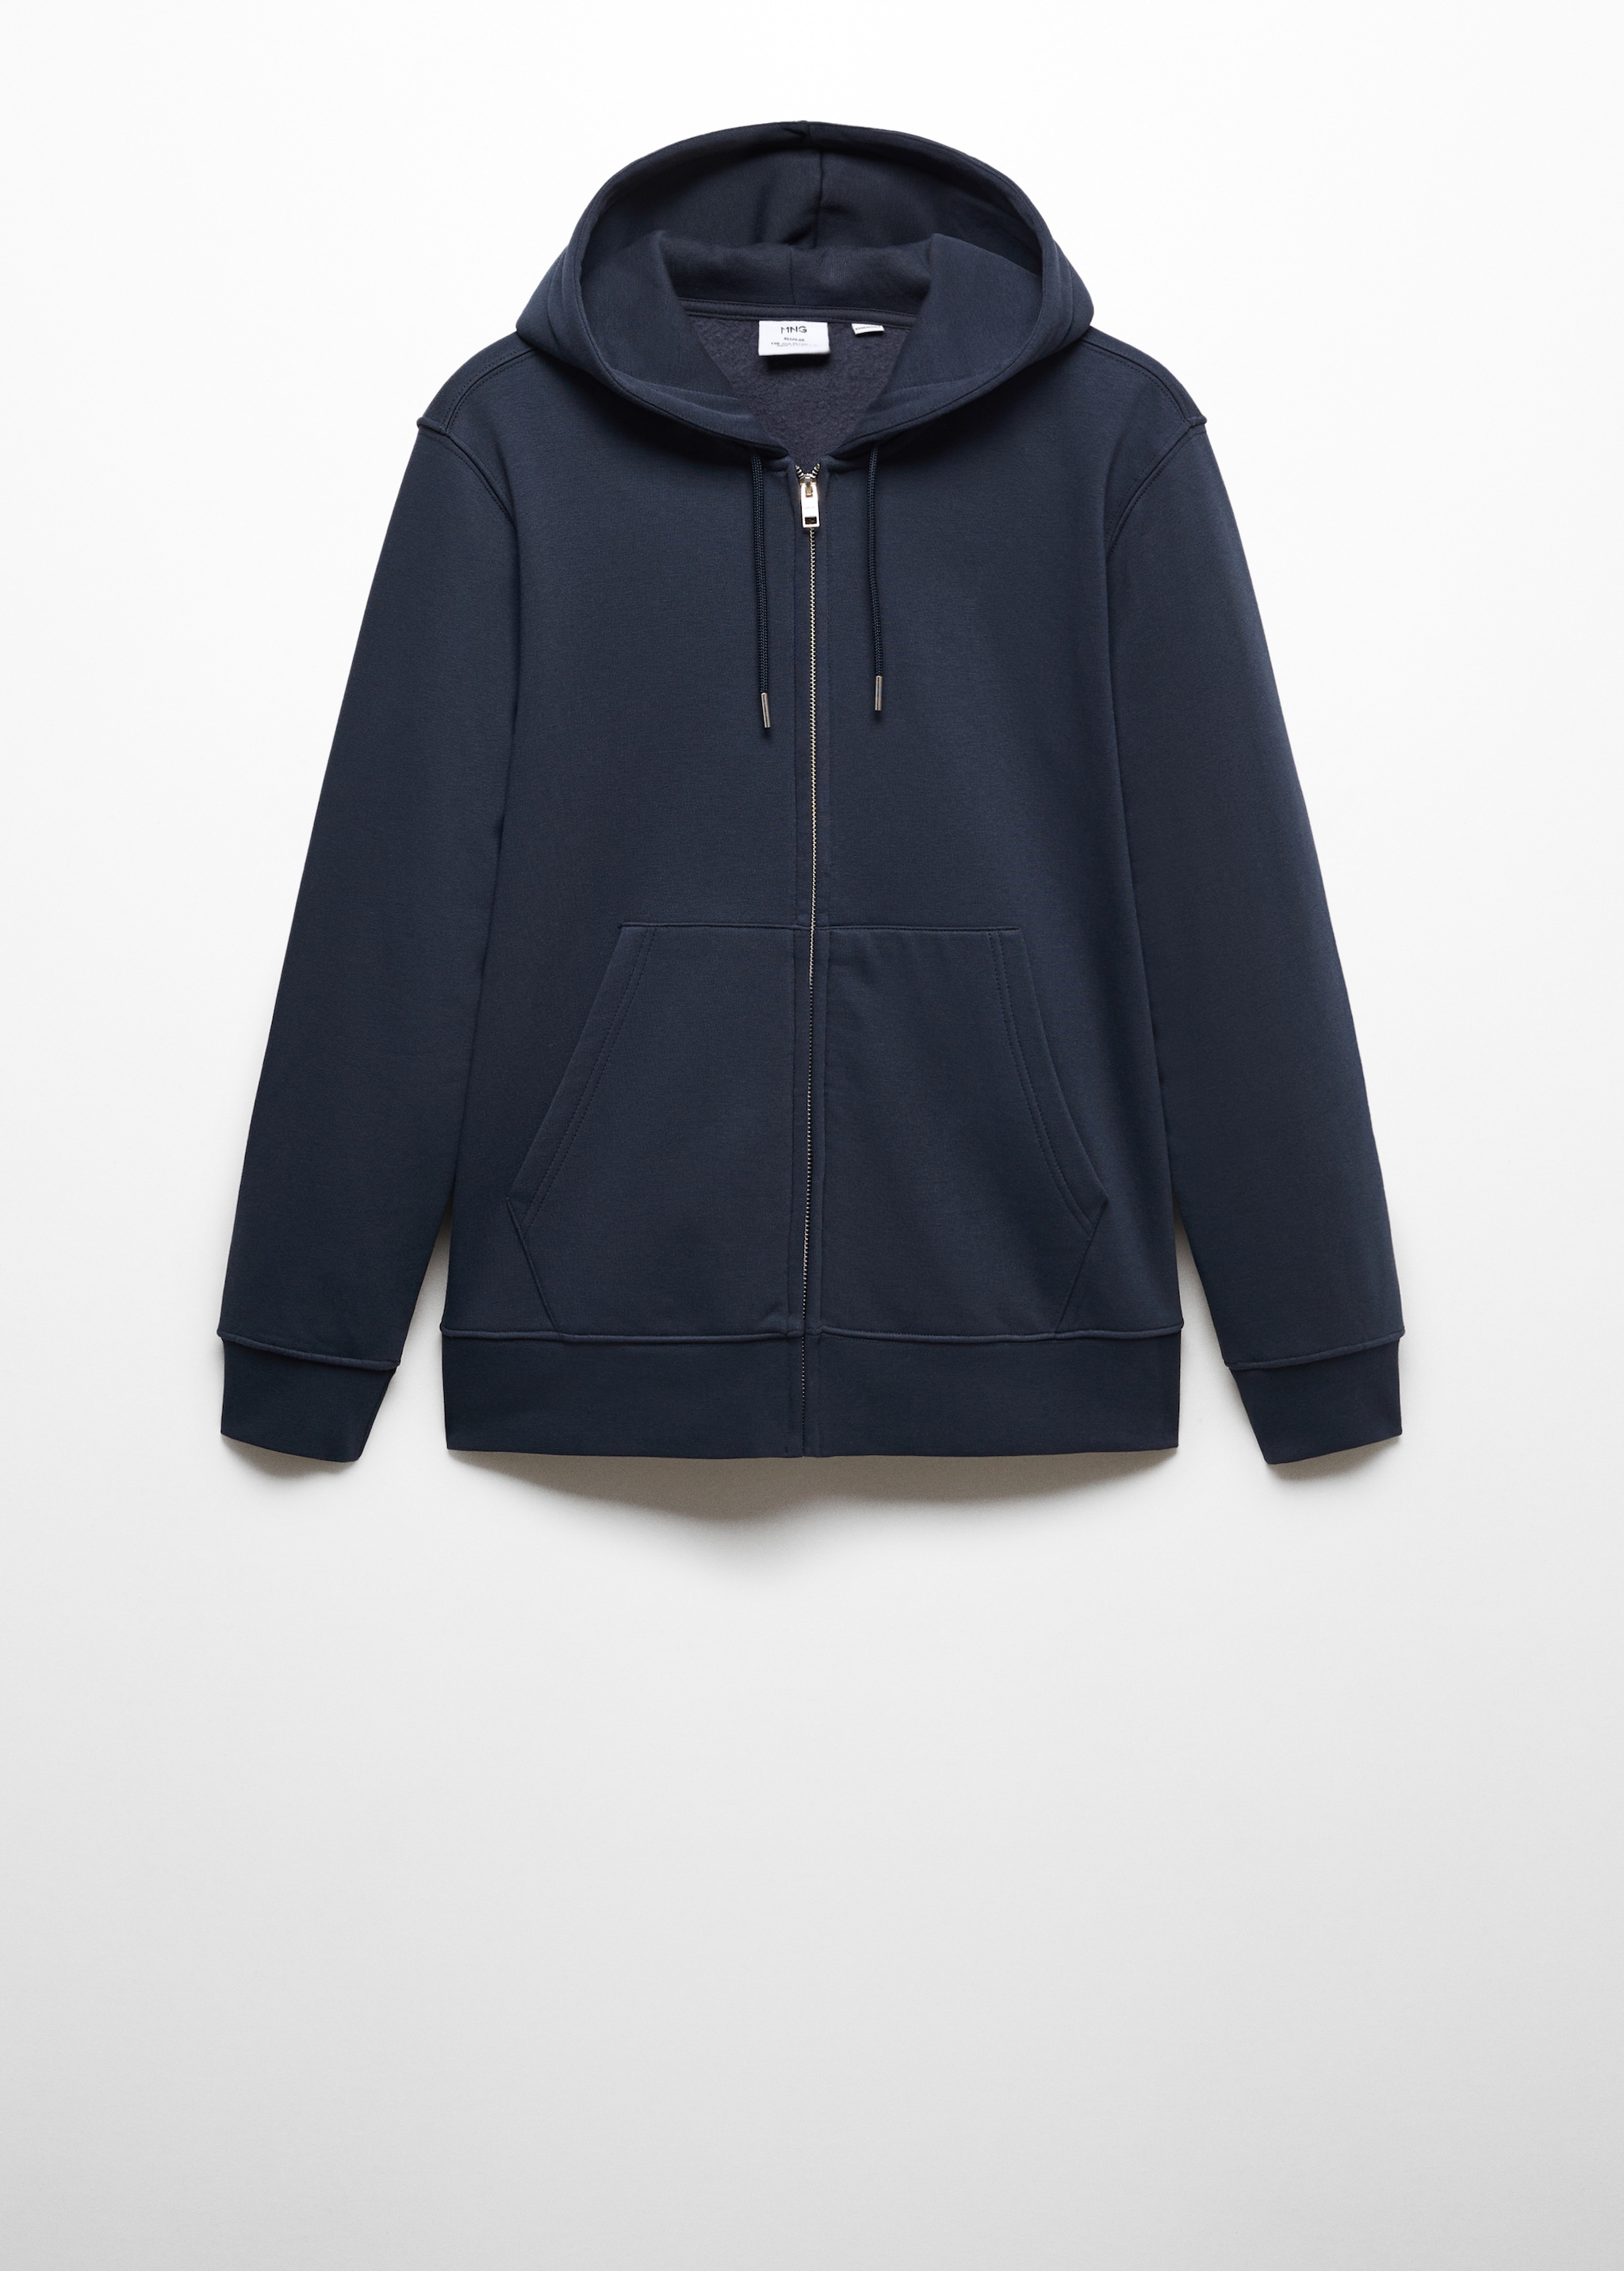 Cotton zip-up hoodie - Article without model